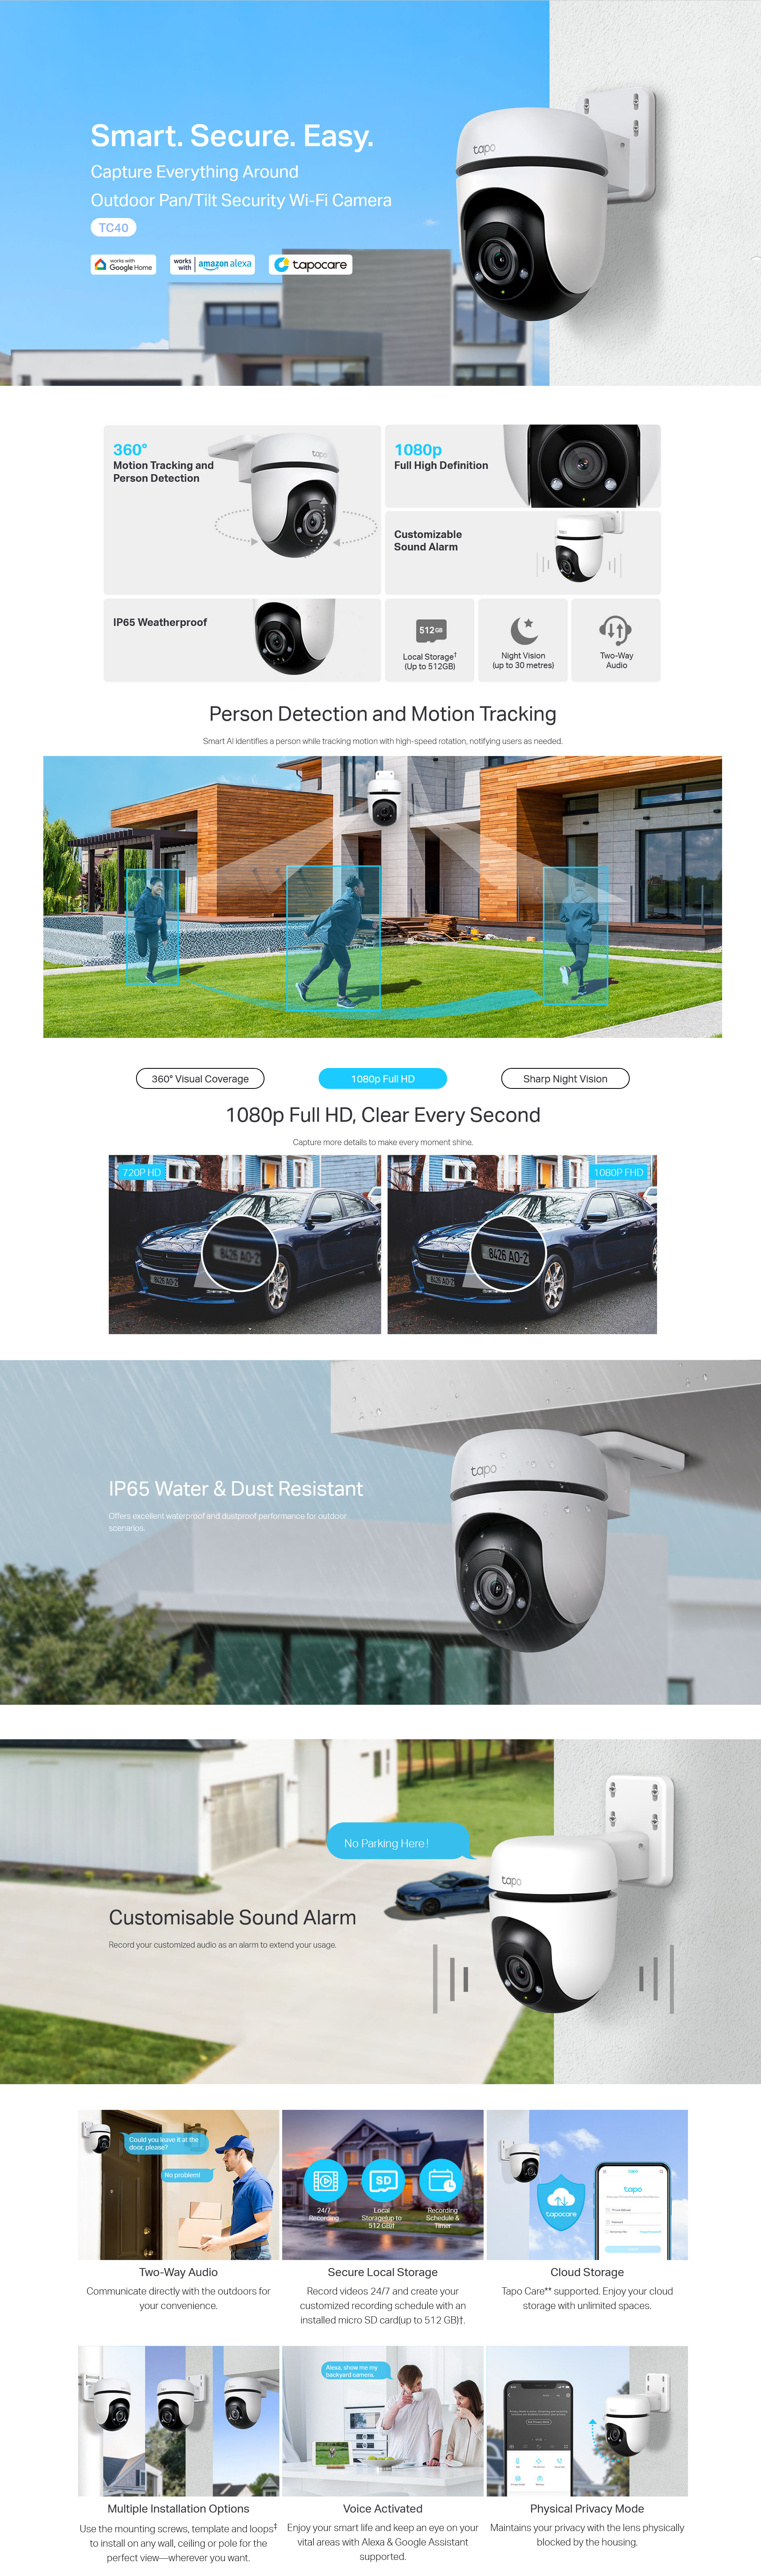 A large marketing image providing additional information about the product TP-Link Tapo TC40 - Outdoor Pan/Tilt Security Wi-Fi Camera - Additional alt info not provided